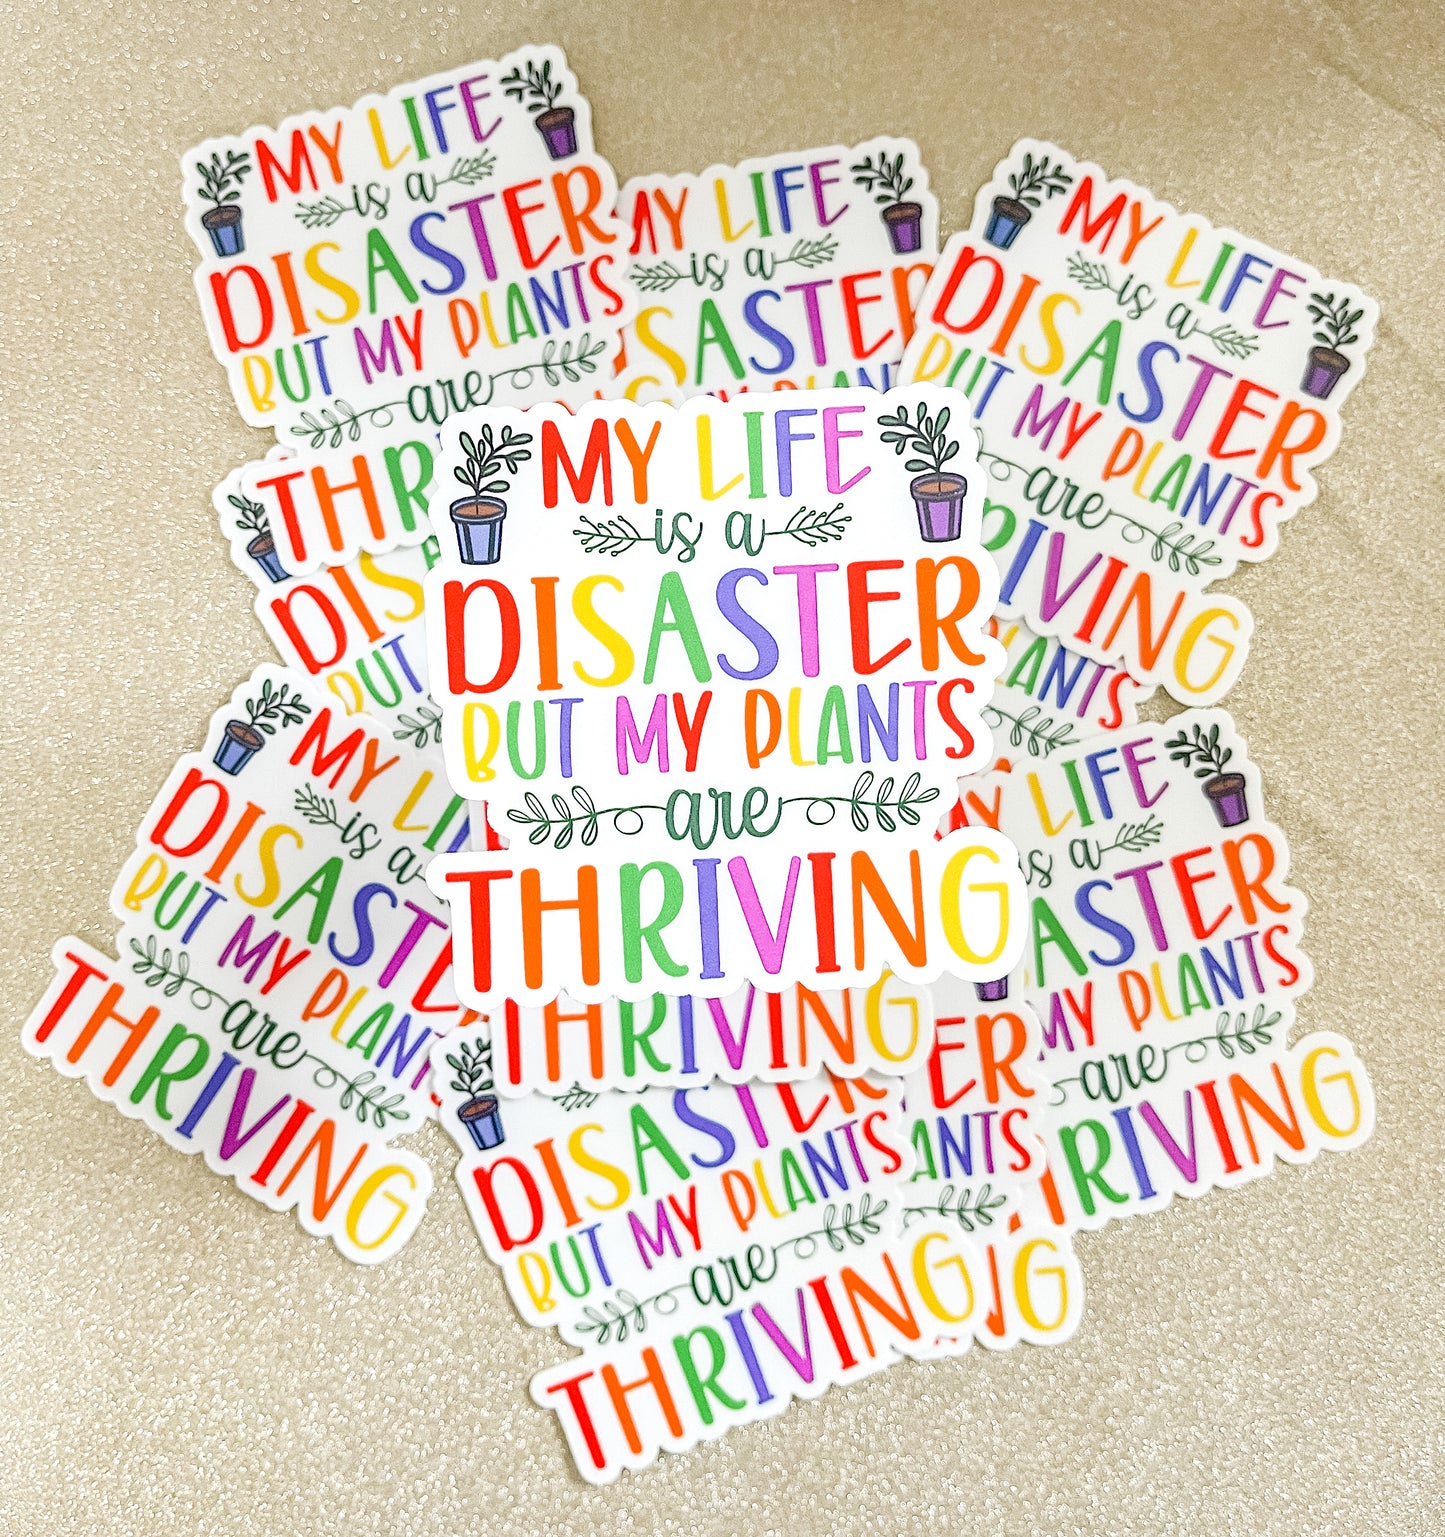 Life is a Disaster - Sticker or Magnet